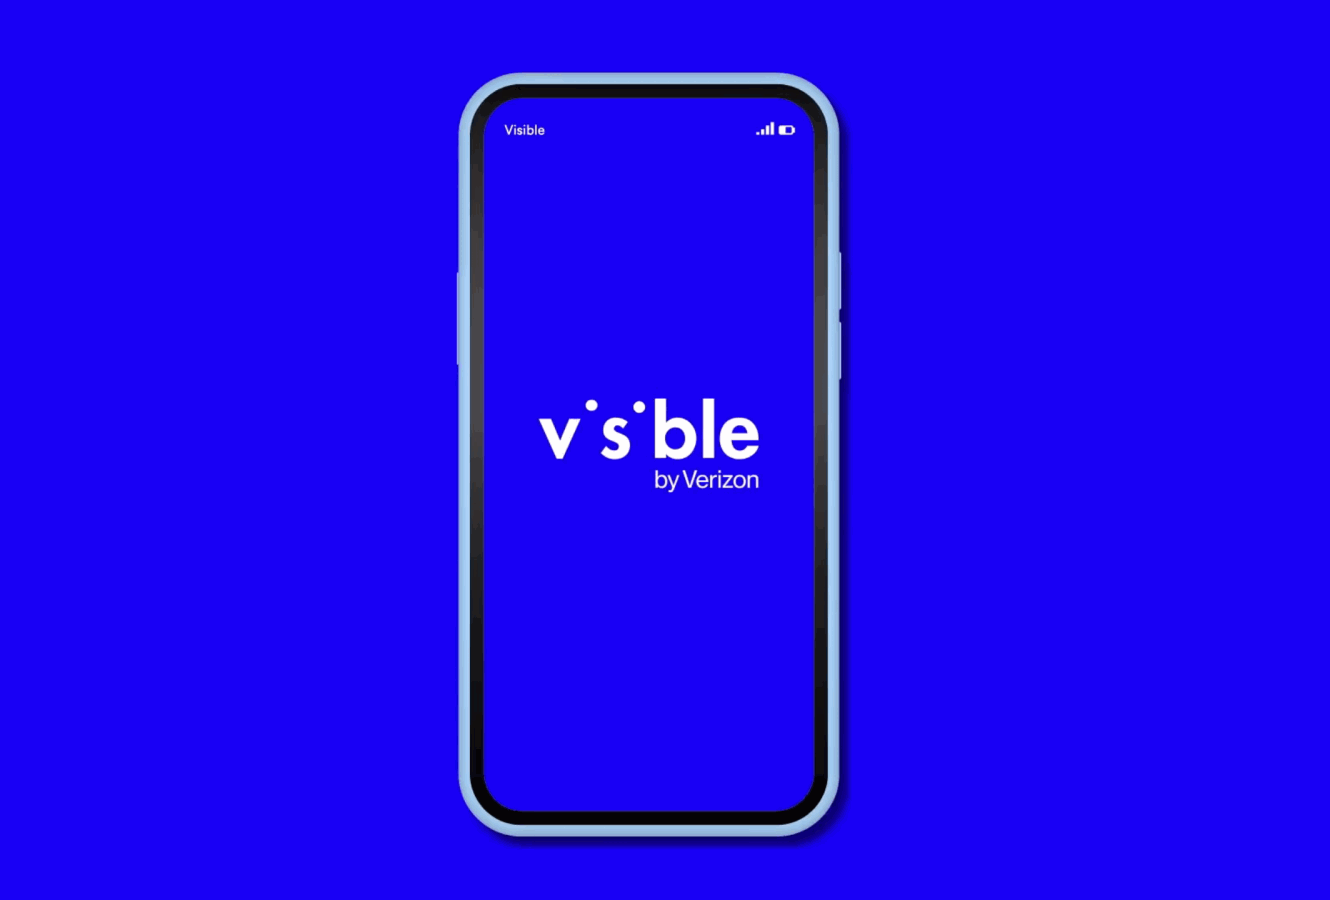 Visible Launches New TV Ads With New Branding